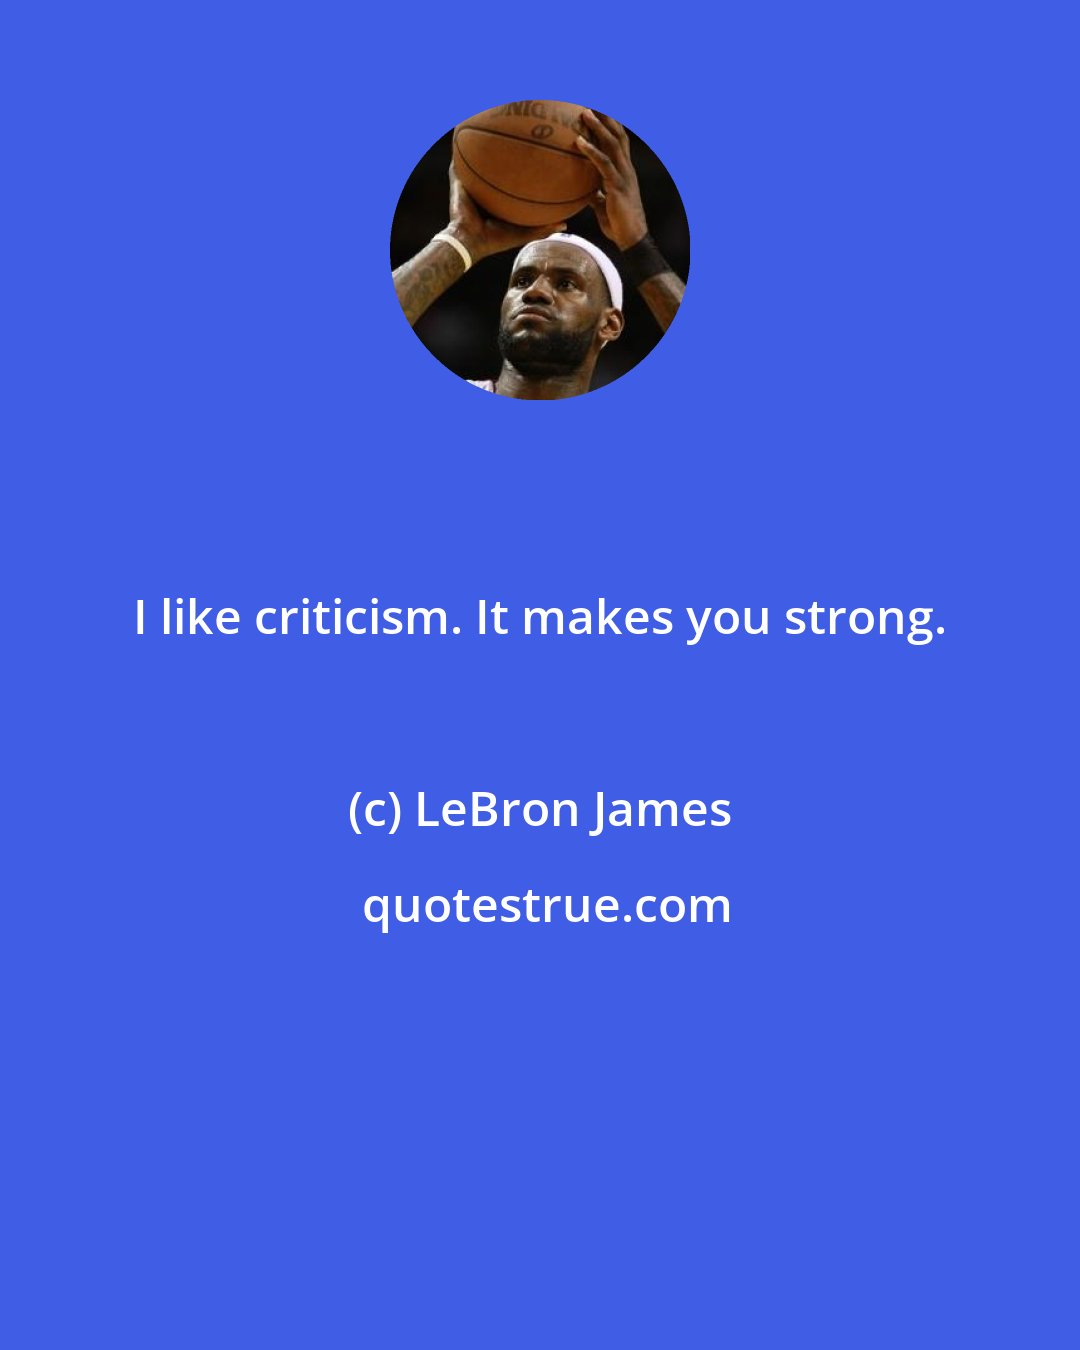 LeBron James: I like criticism. It makes you strong.